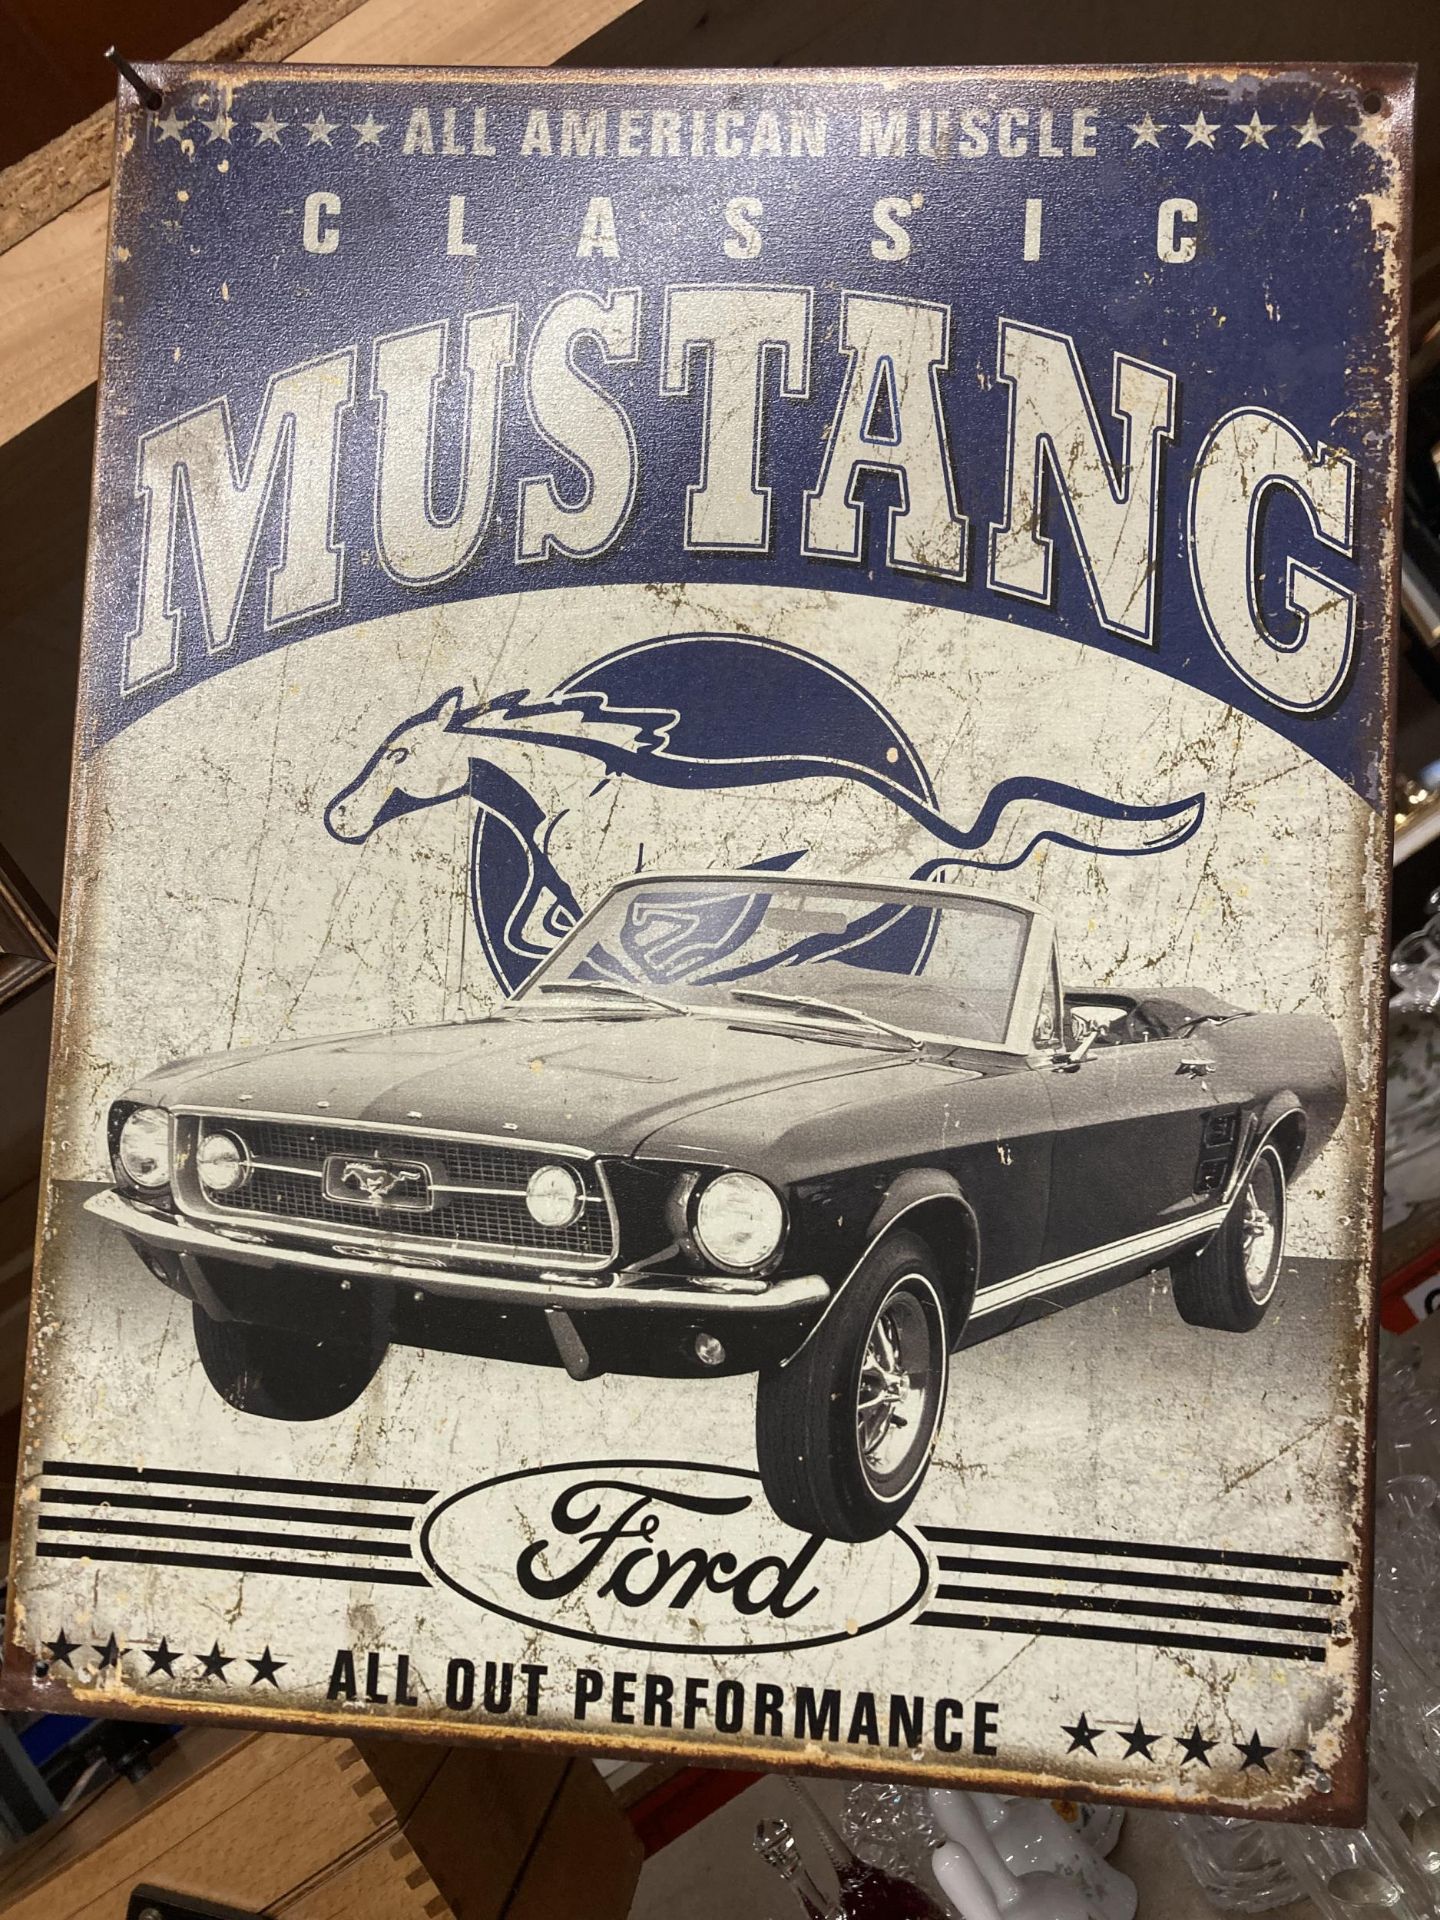 A FORD MUSTANG TIN SIGN 32CM X 40CM